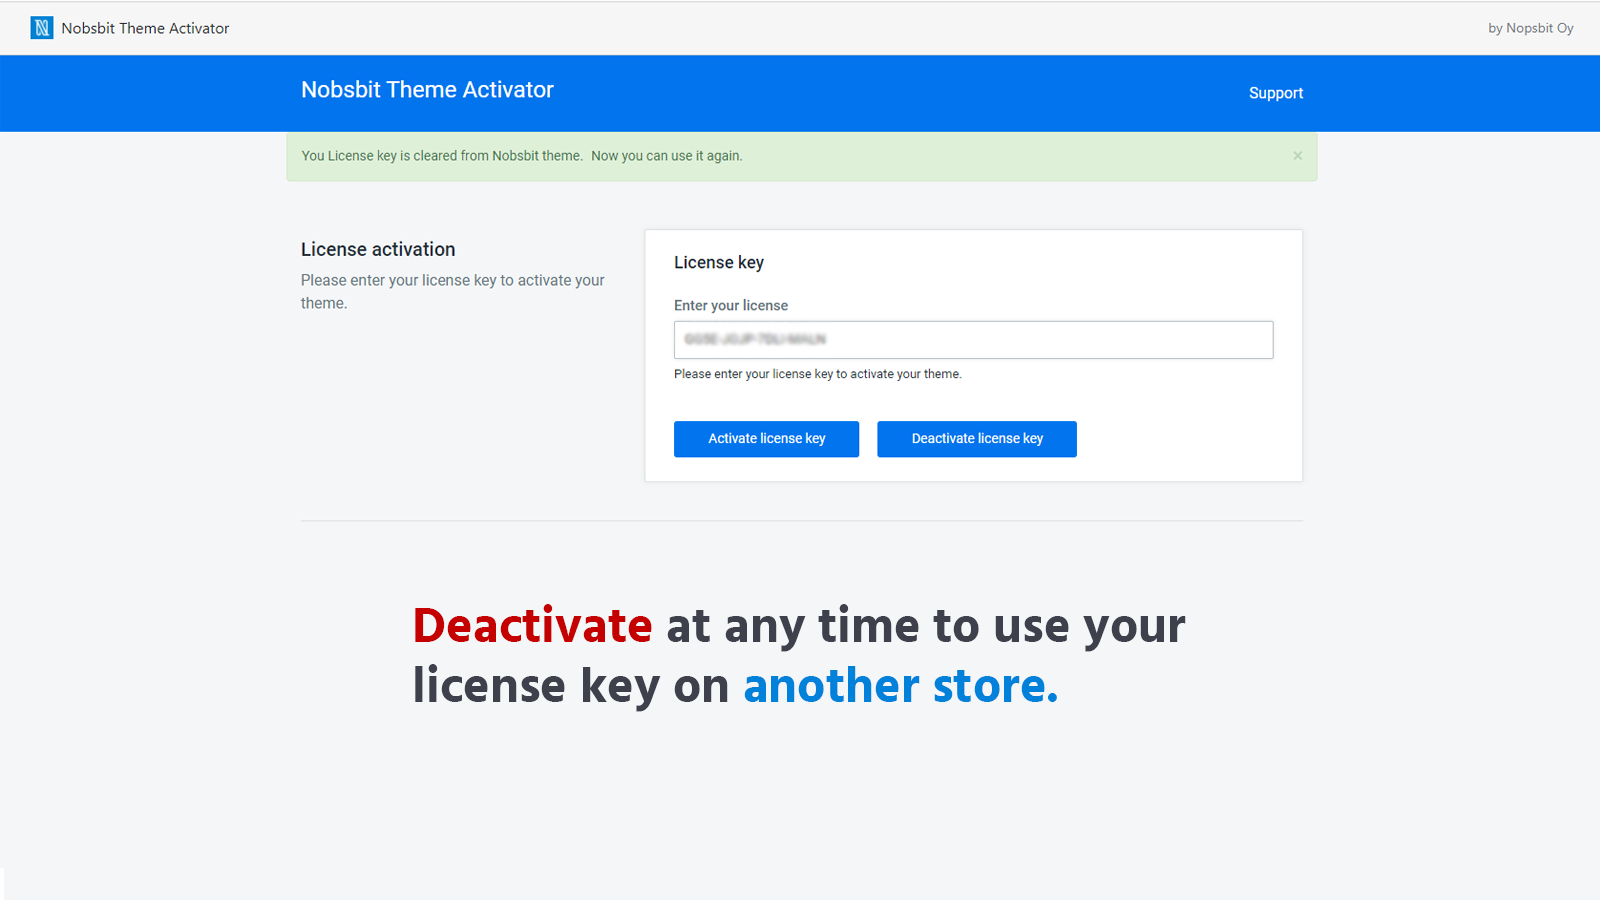 Deactivate at any time to use your license key on another store